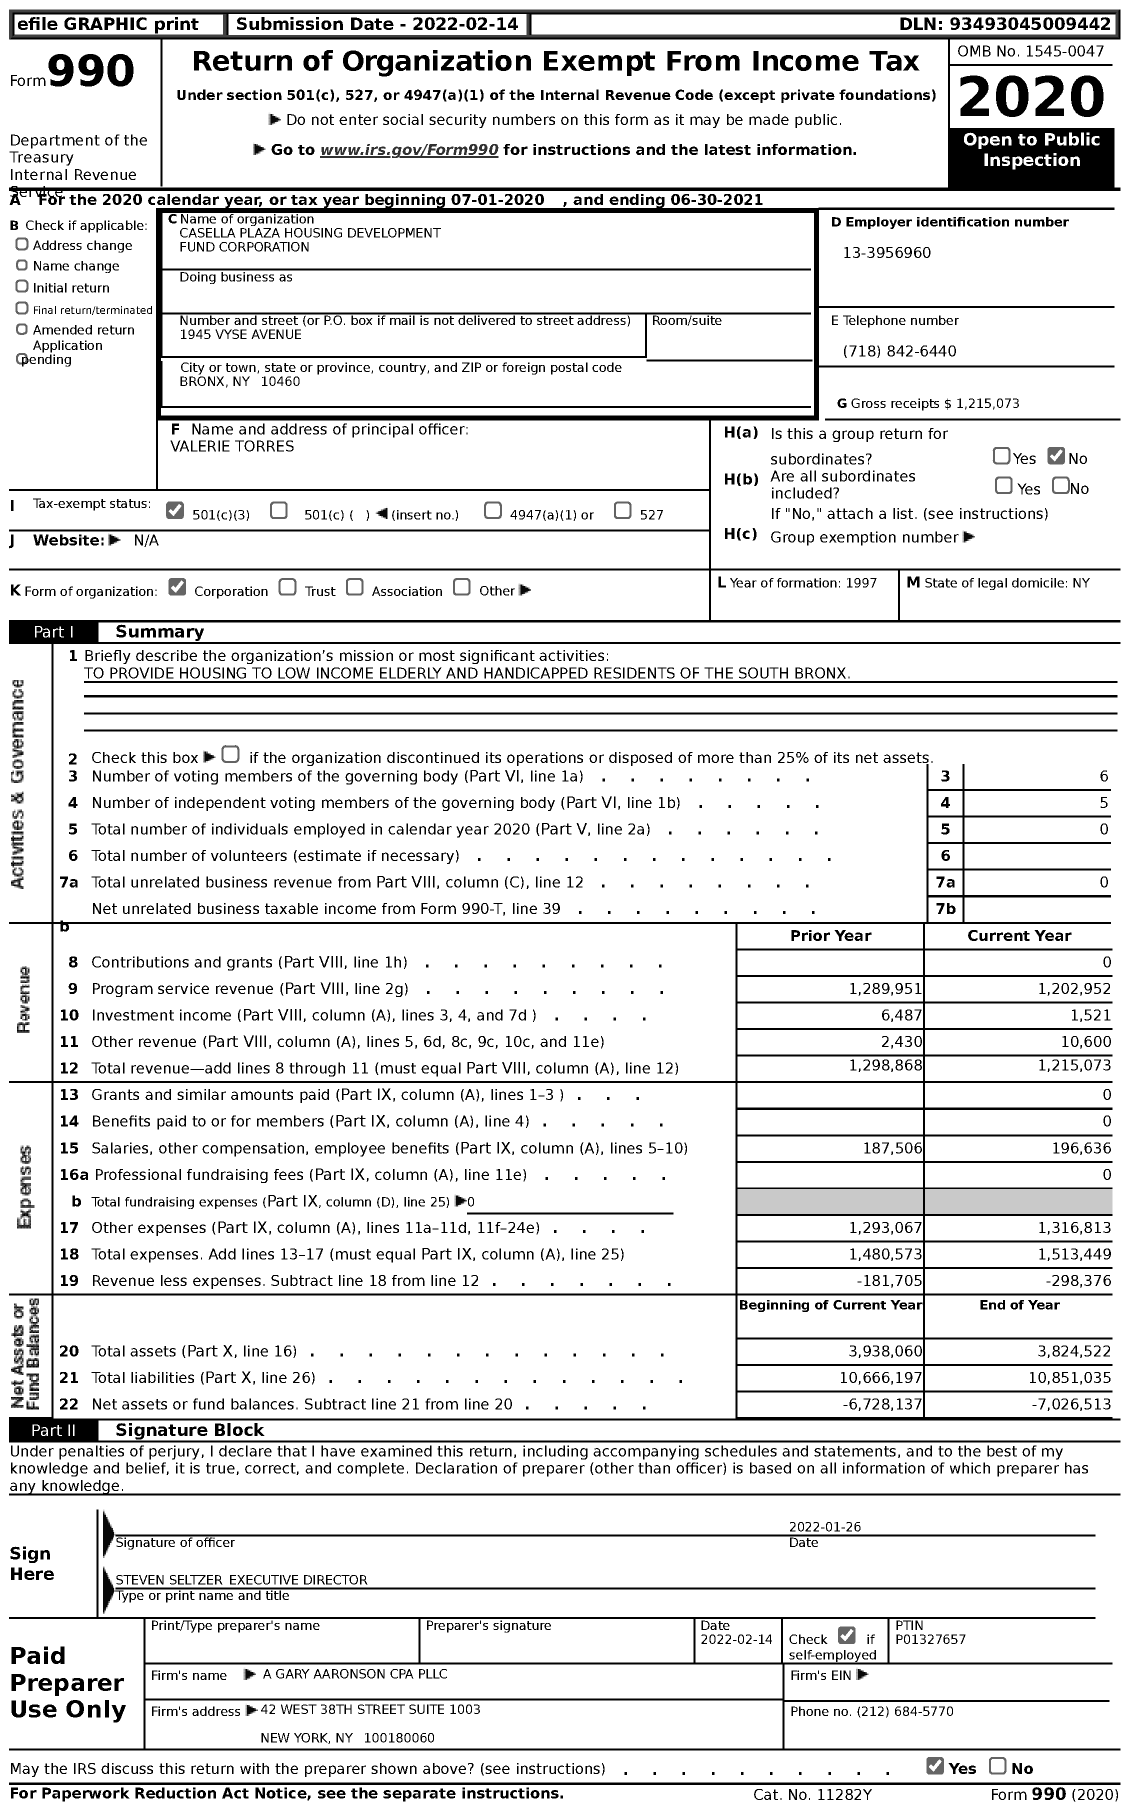 Image of first page of 2020 Form 990 for Casella Plaza Housing Development Fund Corporation